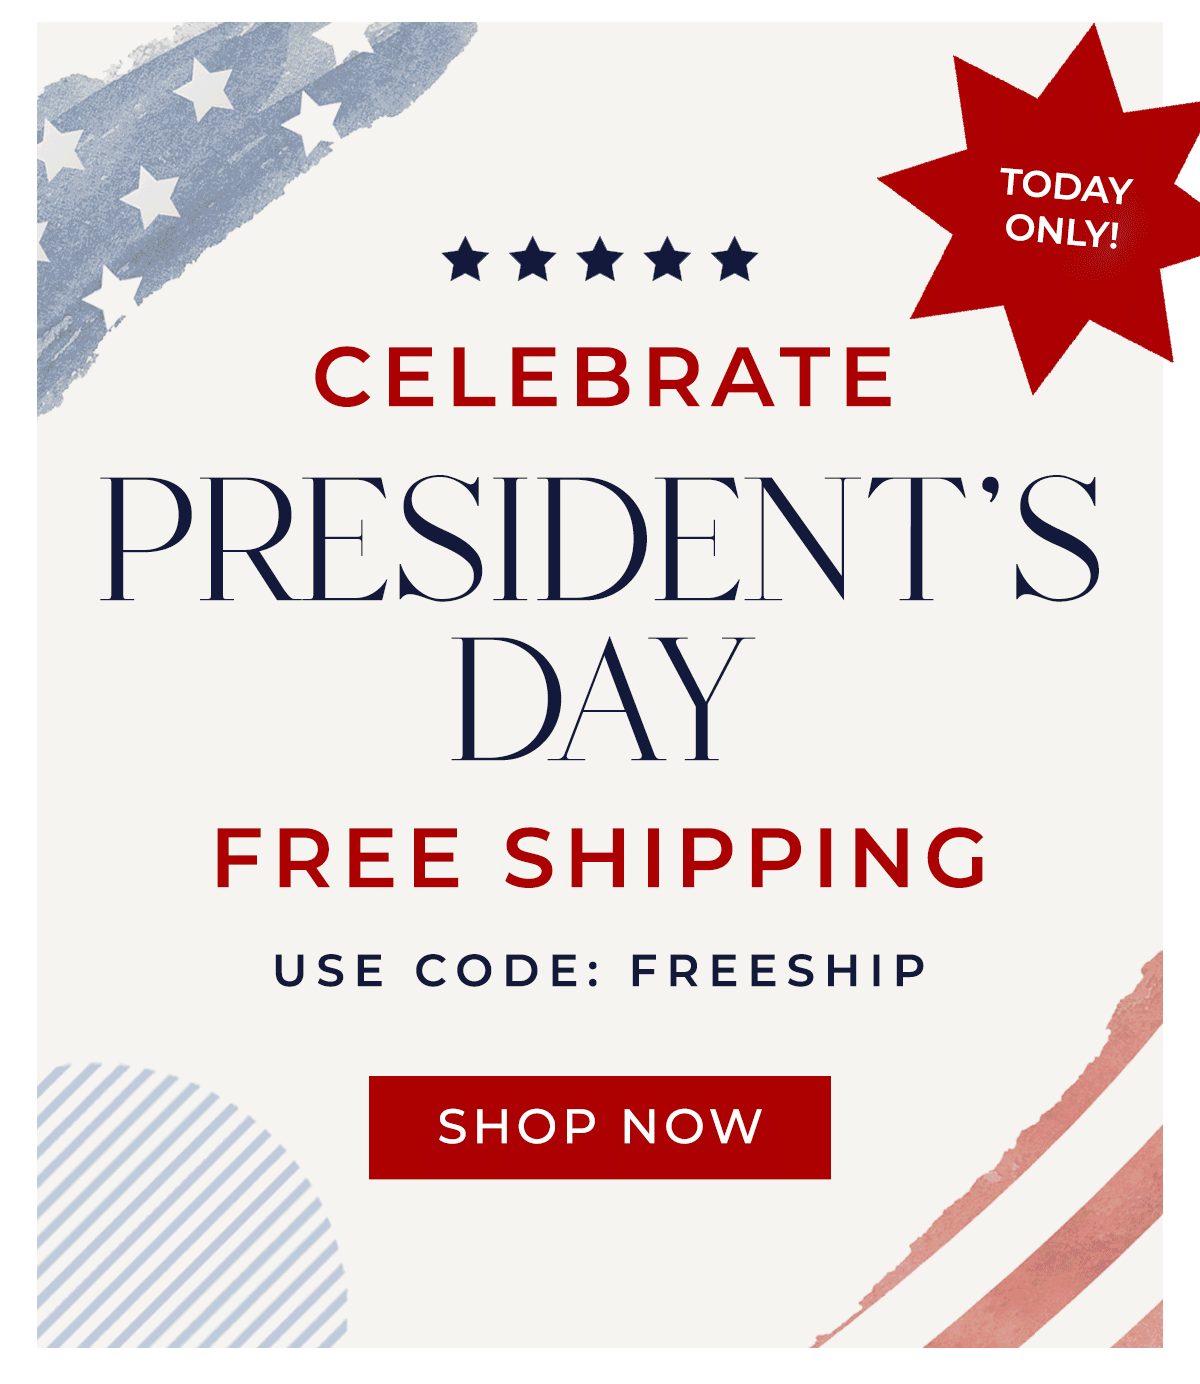 TODAY ONLY! Celebrate Presidents' Day Free Shipping Use code: FREESHIP